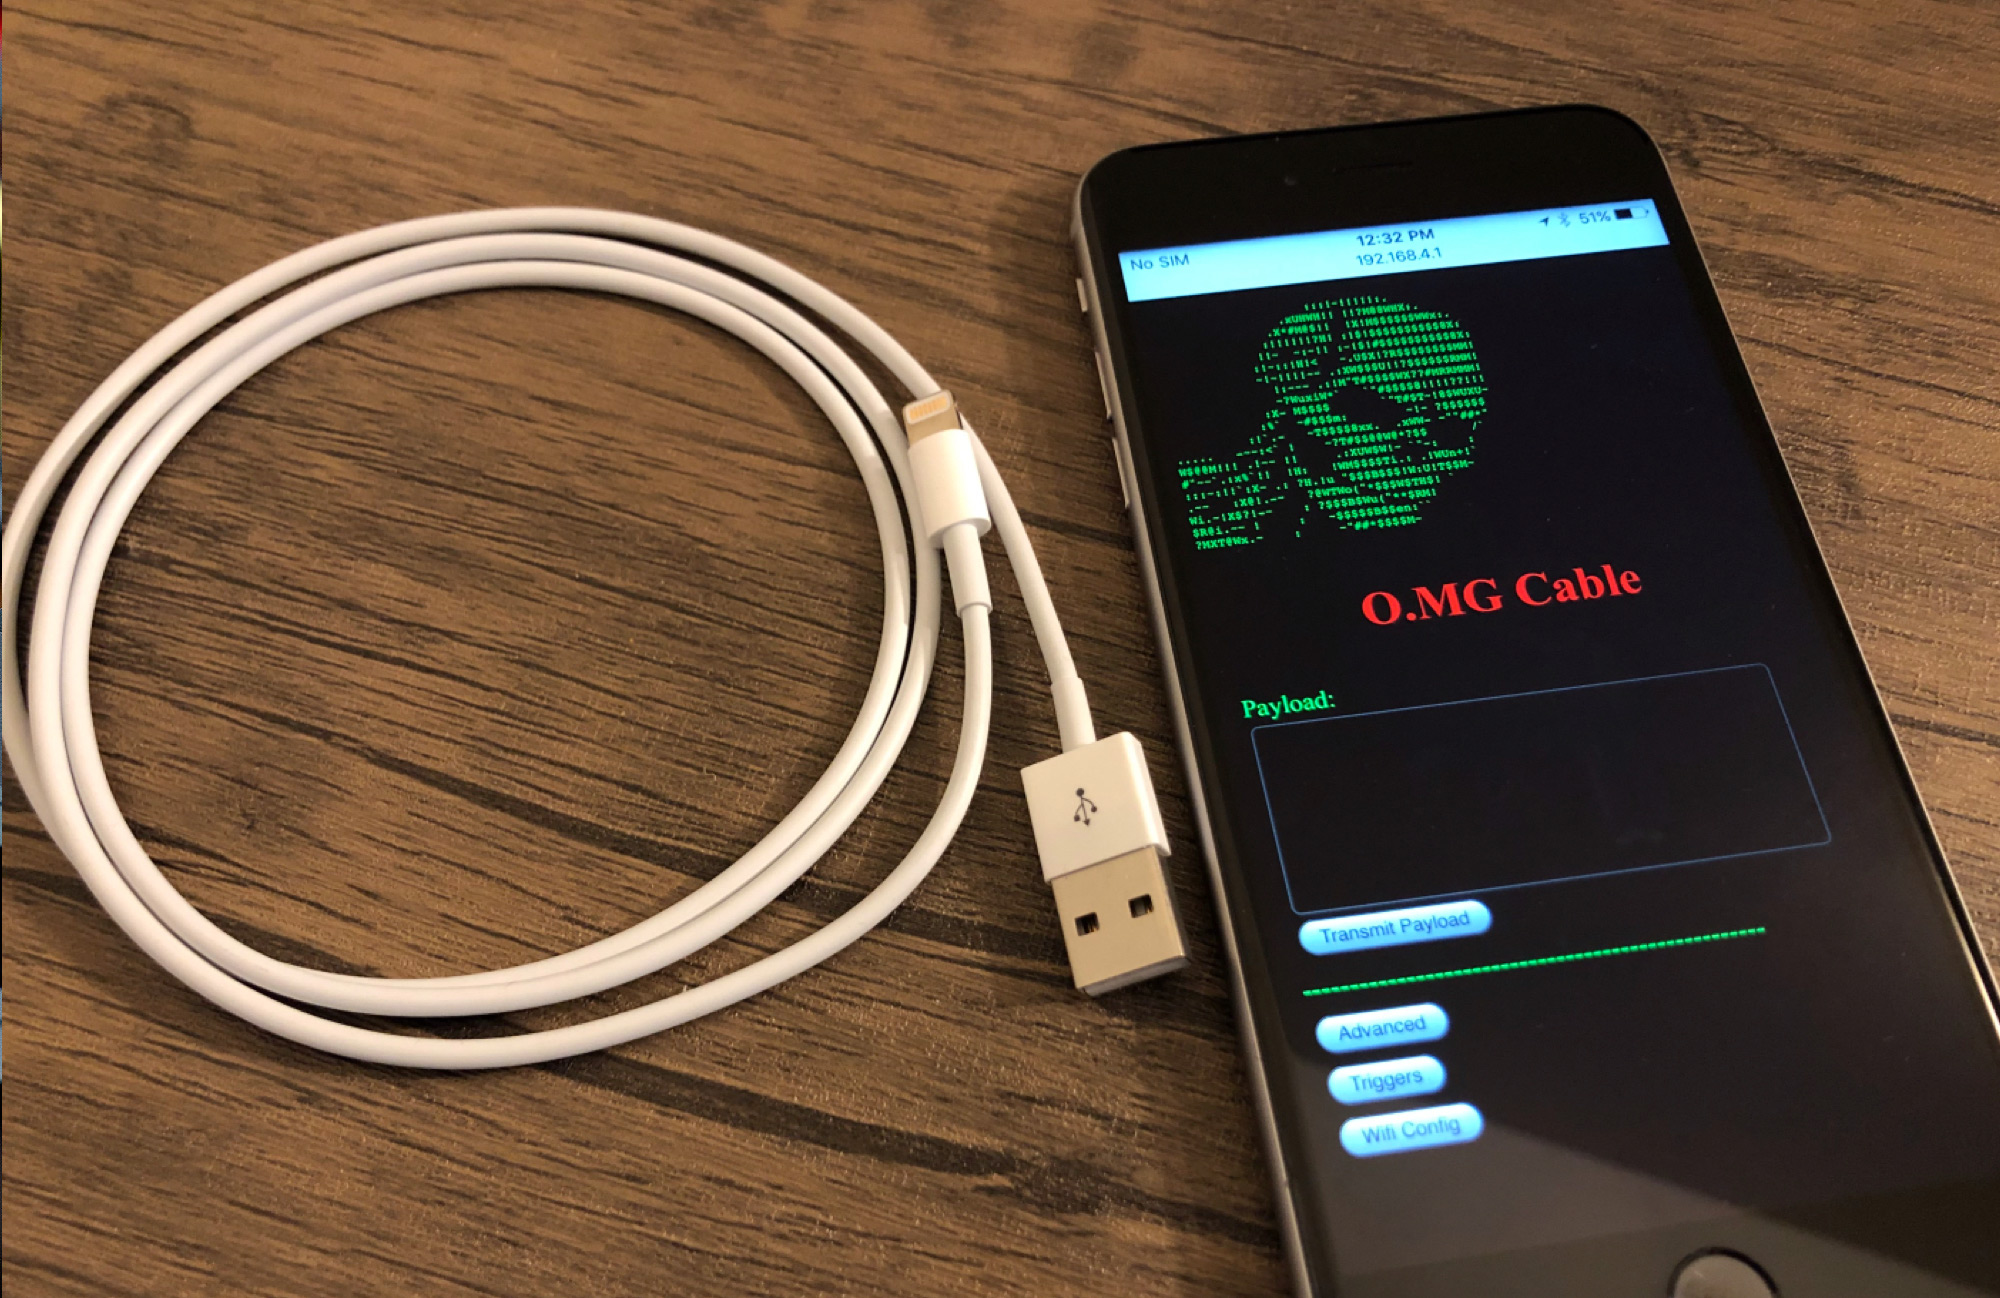 This hacker's iPhone charging cable can hijack your computer | TechCrunch